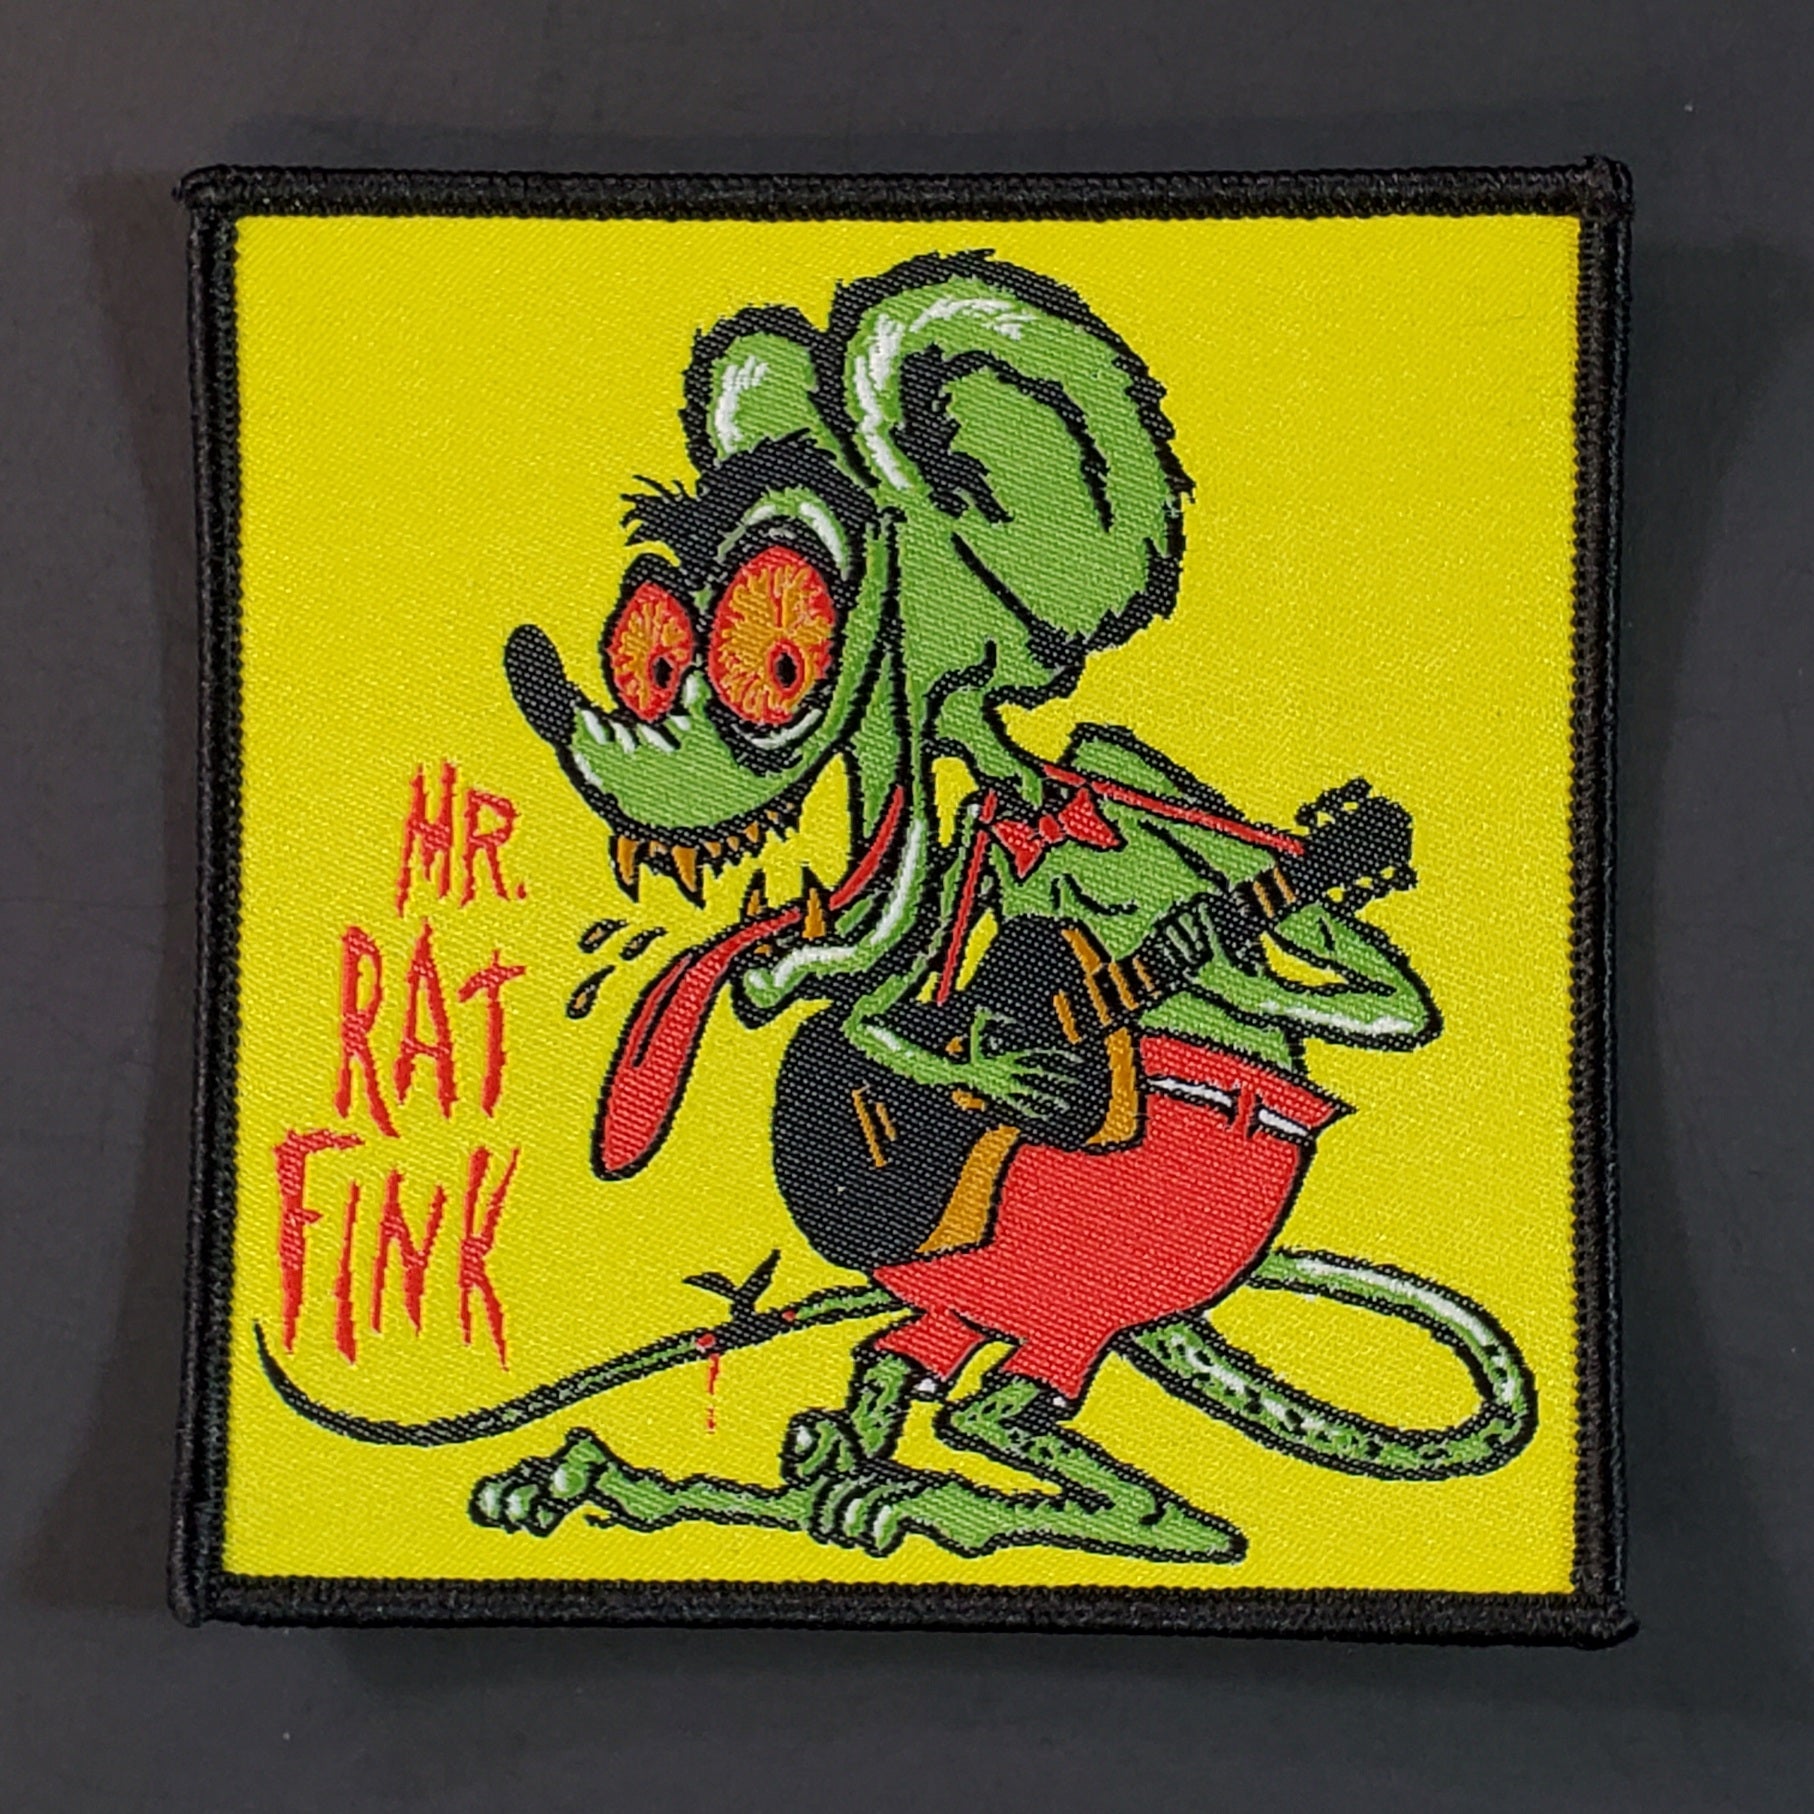 A green, red, white, orange, and black woven patch with a black embroidered border with an illustration of Rat Fink playing an acoustic guitar with the caption “MR. RAT FINK” in red lettering beside